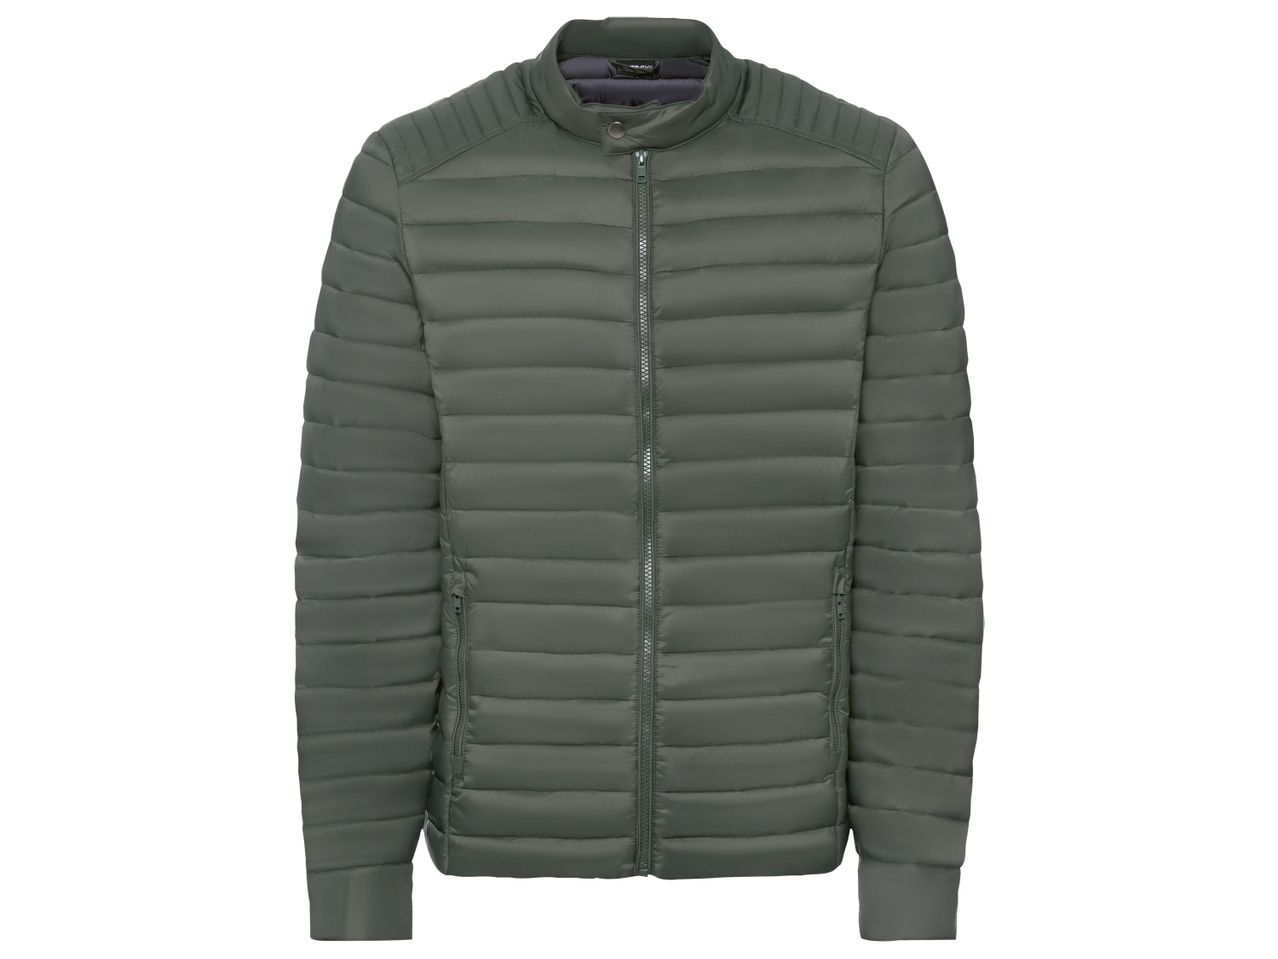 Go to full screen view: Men’s Lightweight Jacket - Image 4